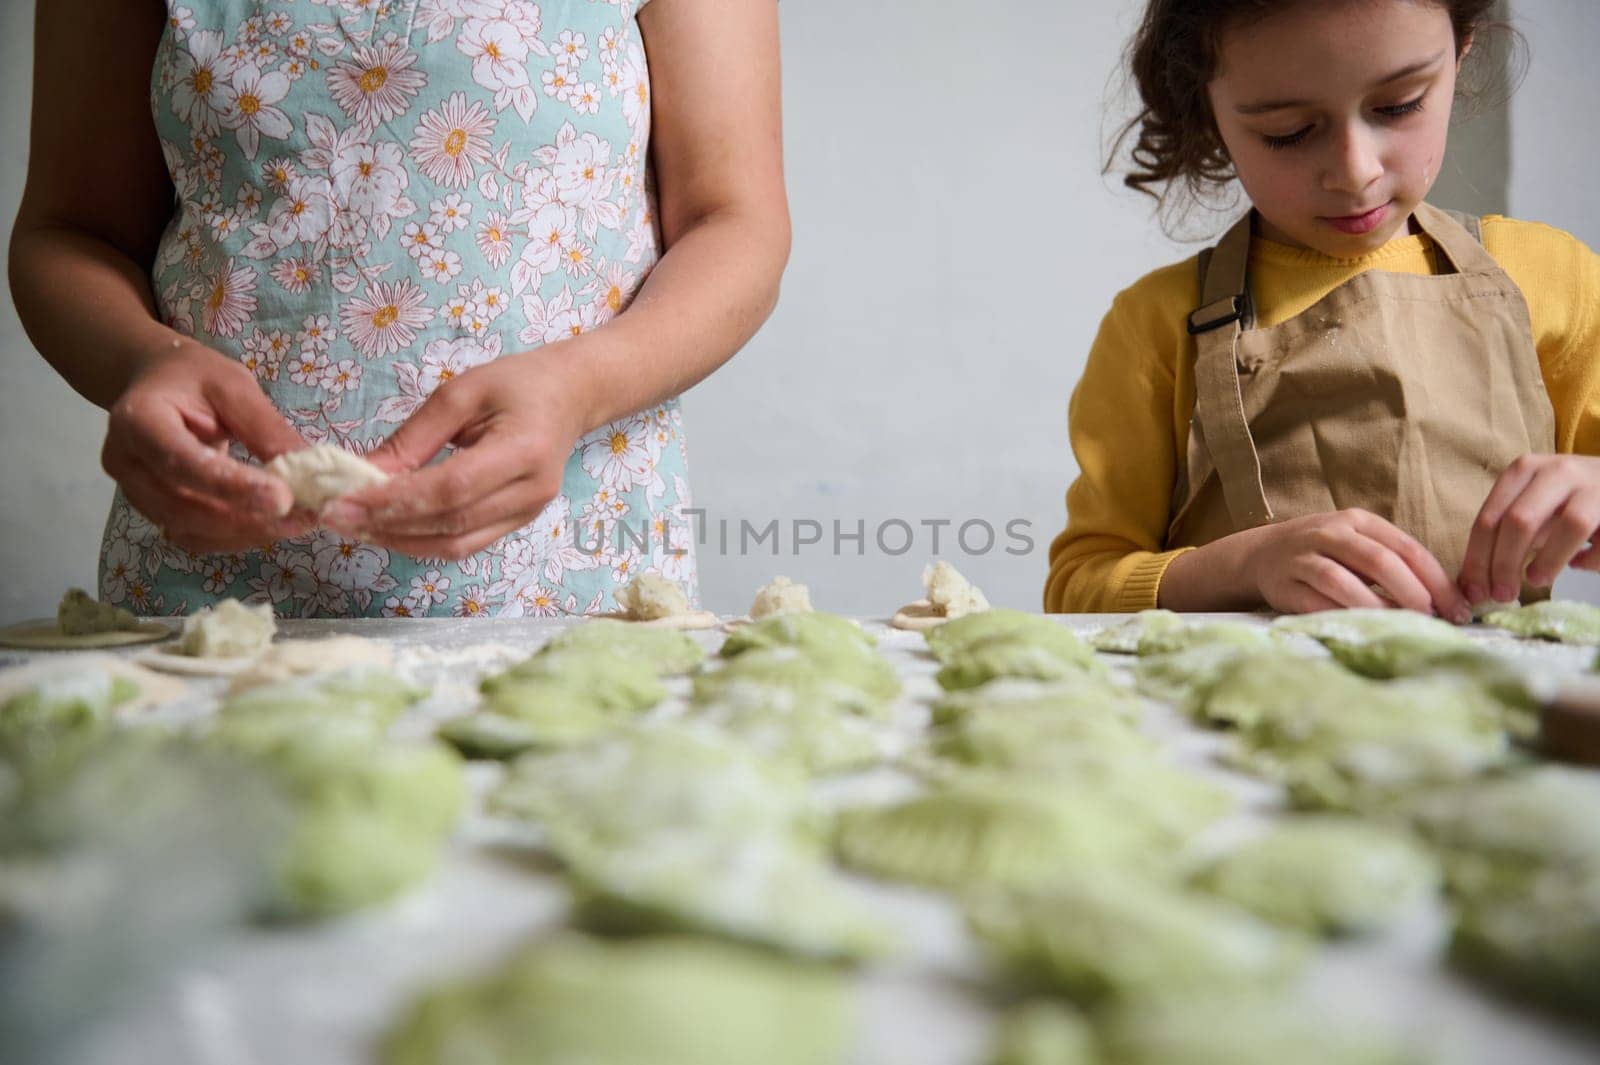 Selective focus on sculpted homemade dumplings on floured table, against the background of young mom and daughter cooking together